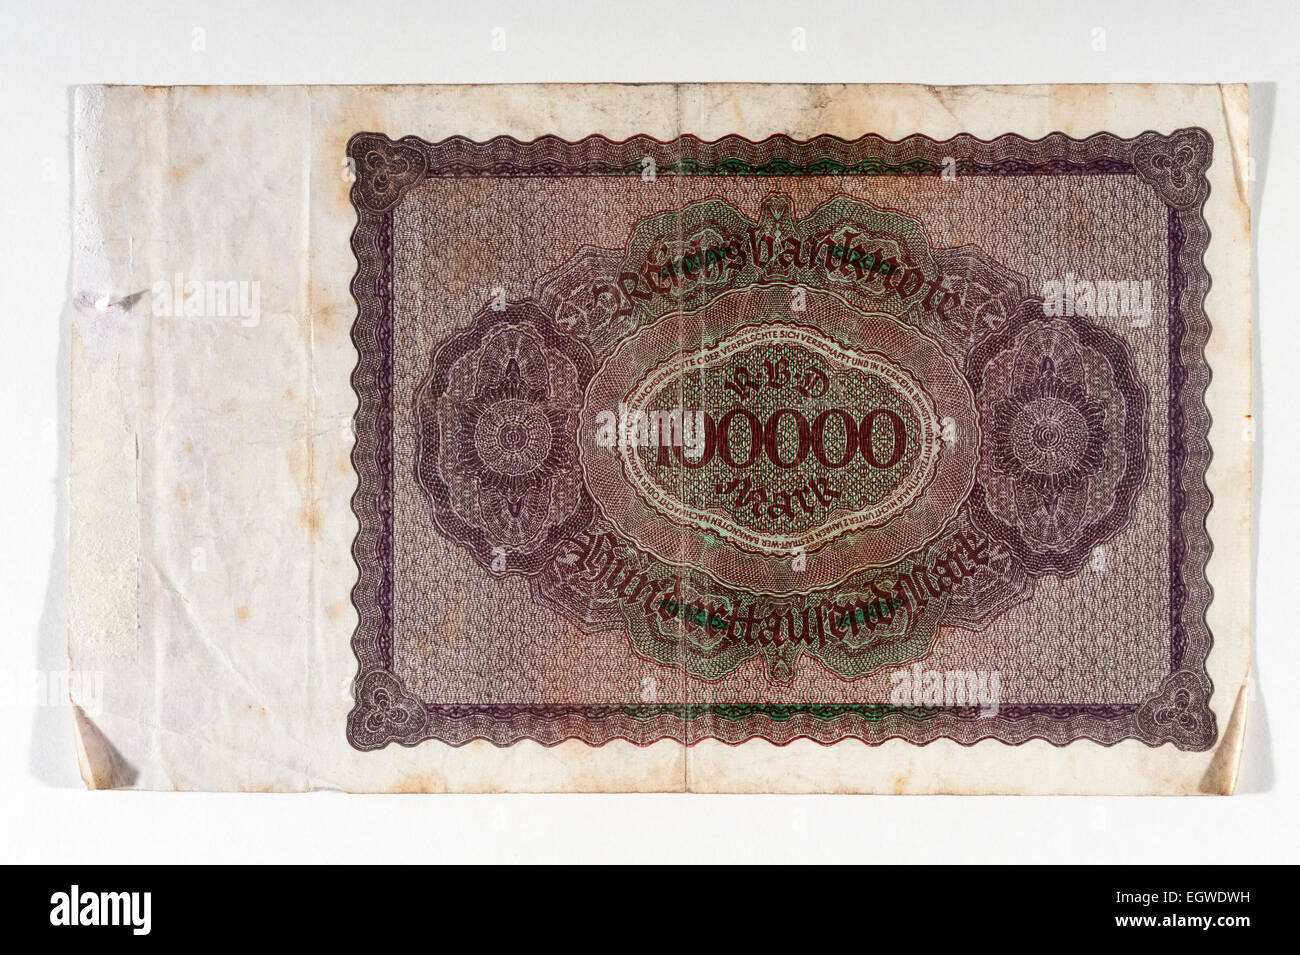 Germany - the reverse of a one hundred thousand mark note, issued by the Weimar Republic on the 1st February 1923 at the start of a period of wild hyperinflation after the Great War Stock Photo